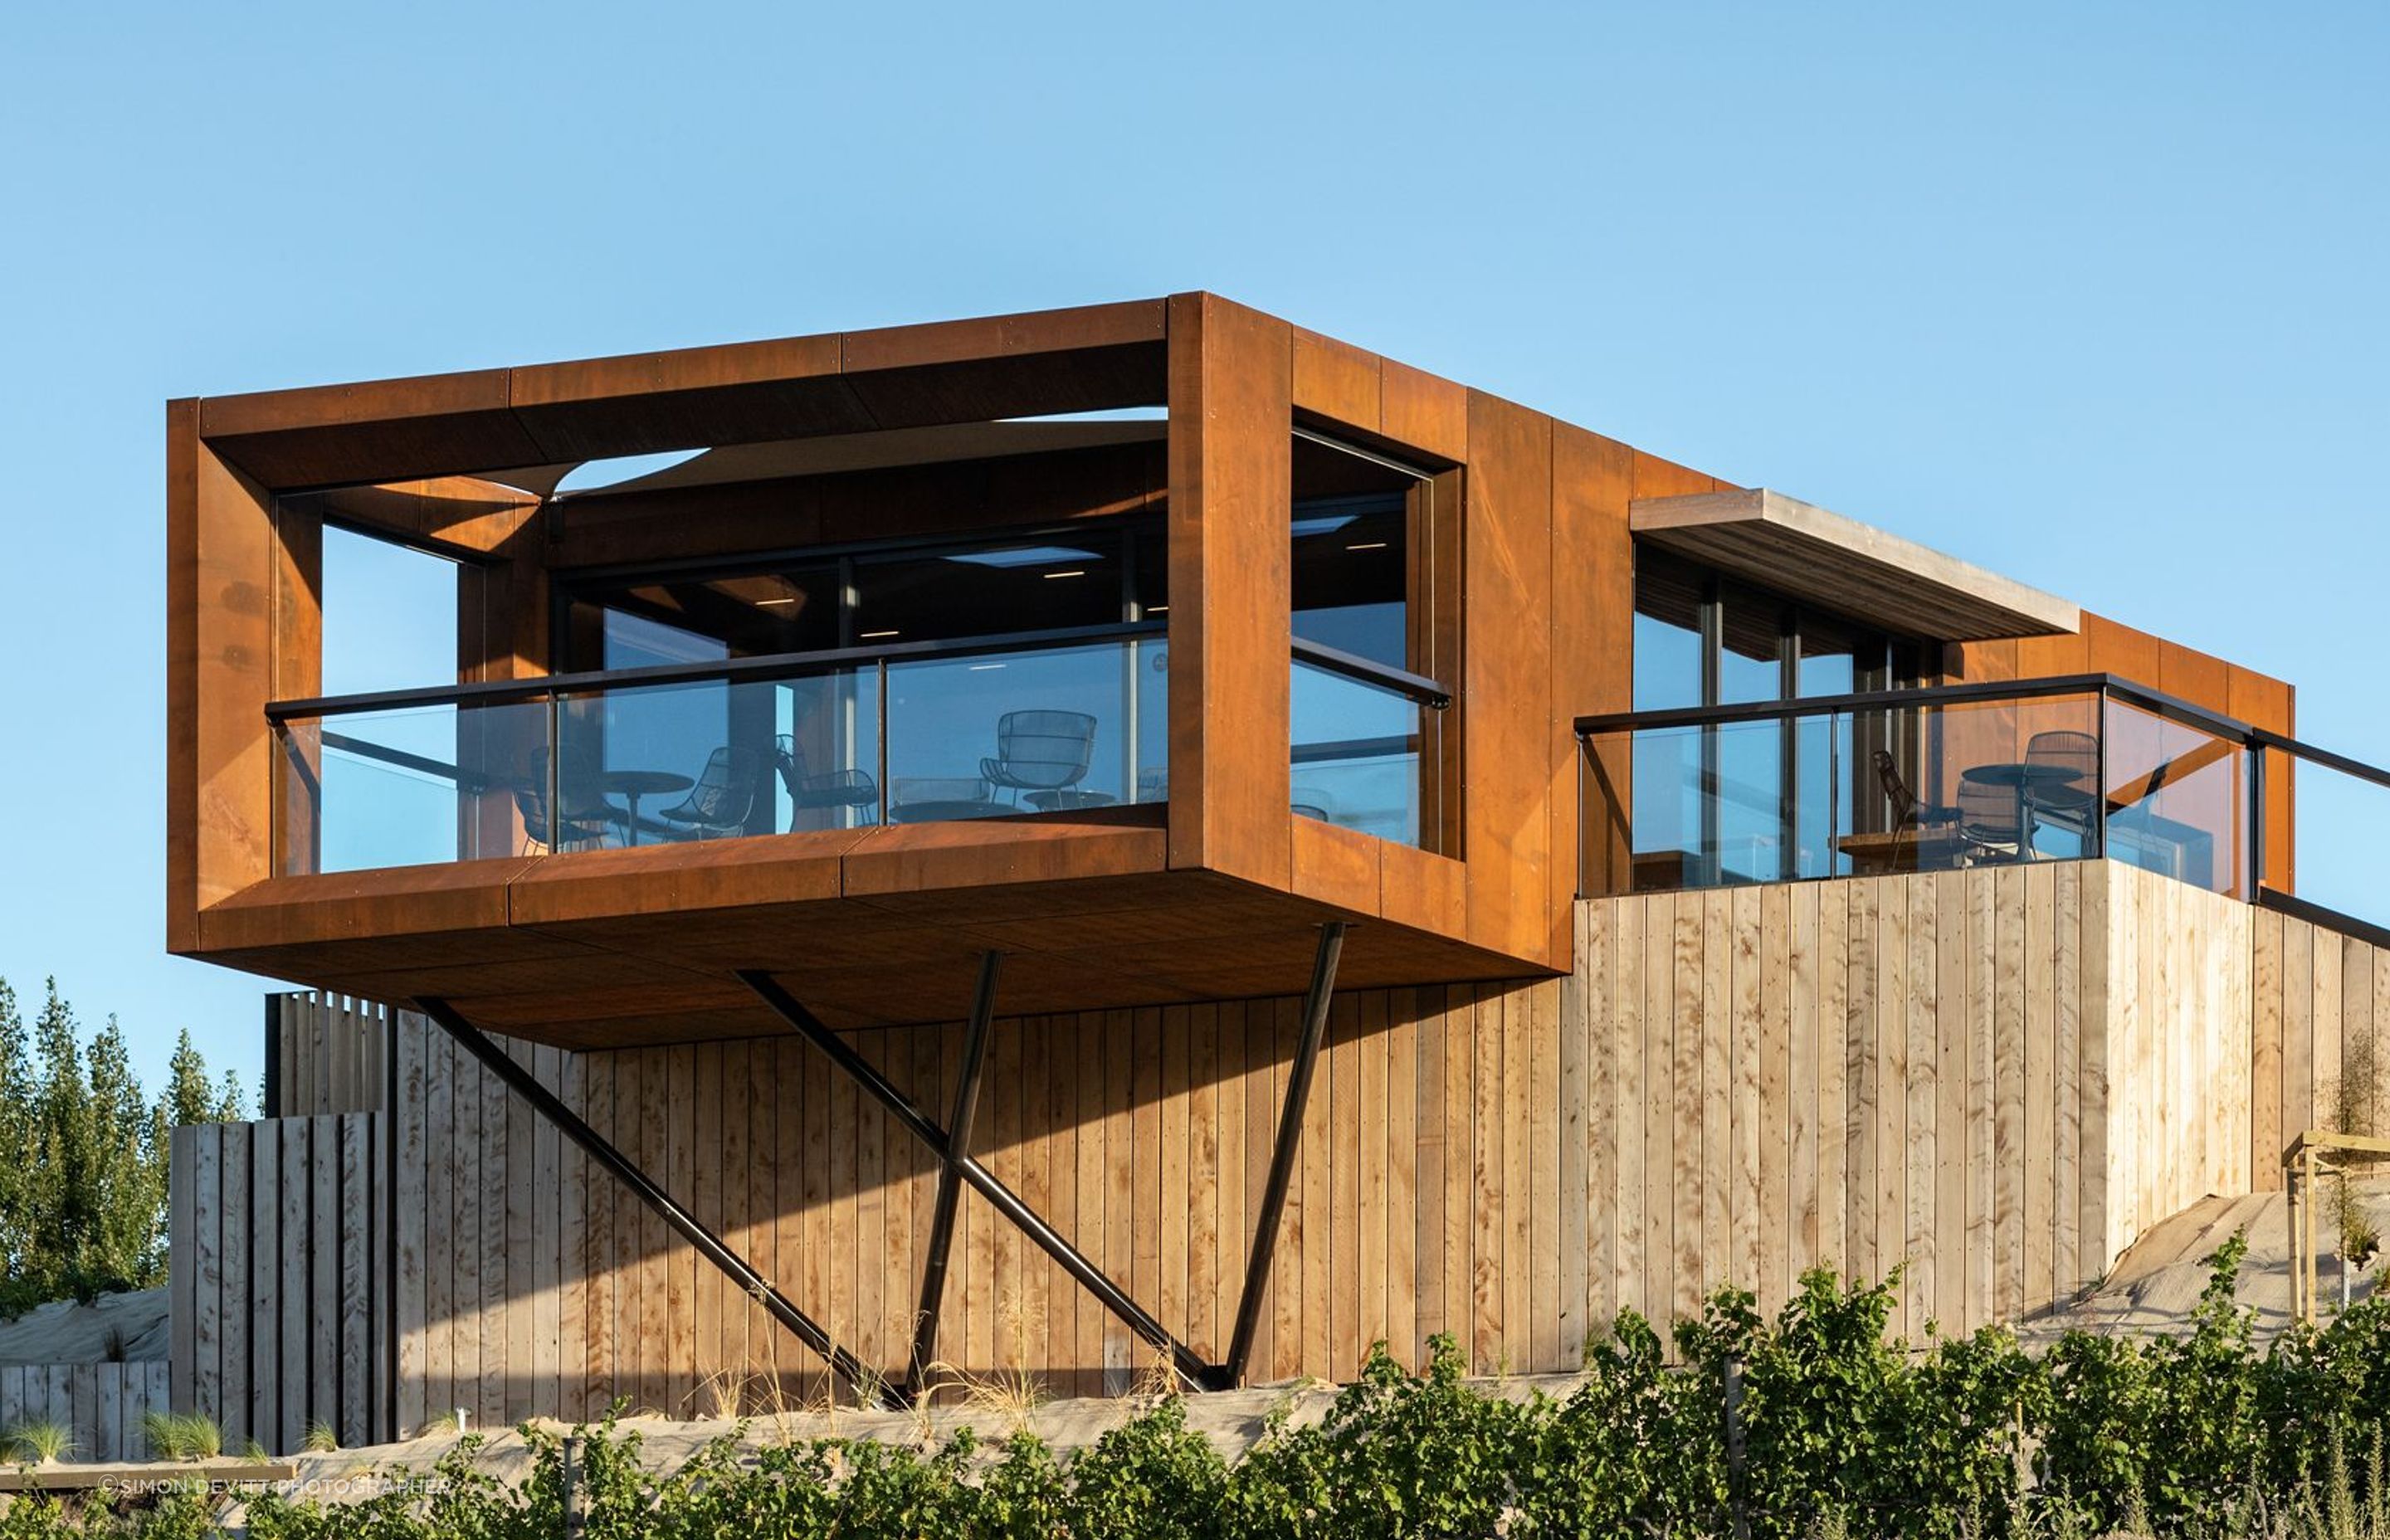 The eye-catching Te Kano Estate cellar door in Bannockburn by Hamish Muir and Matthew Barbour of Mason &amp; Wales Architects is a deceptively small and crafted design. “It's like a treasure box,” says Hamish.